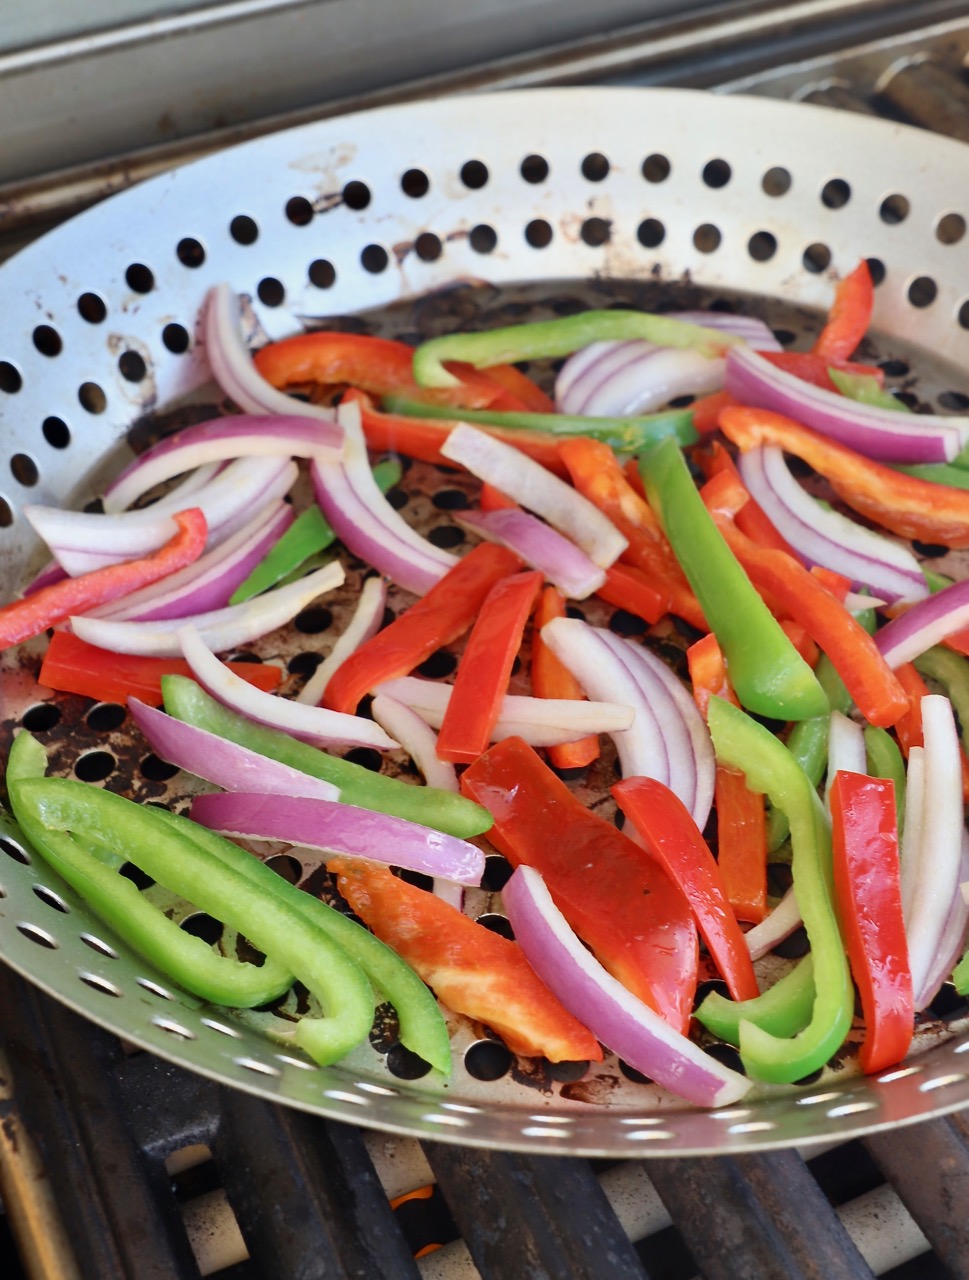 sliced bell peppers and onions in grill basket on grill